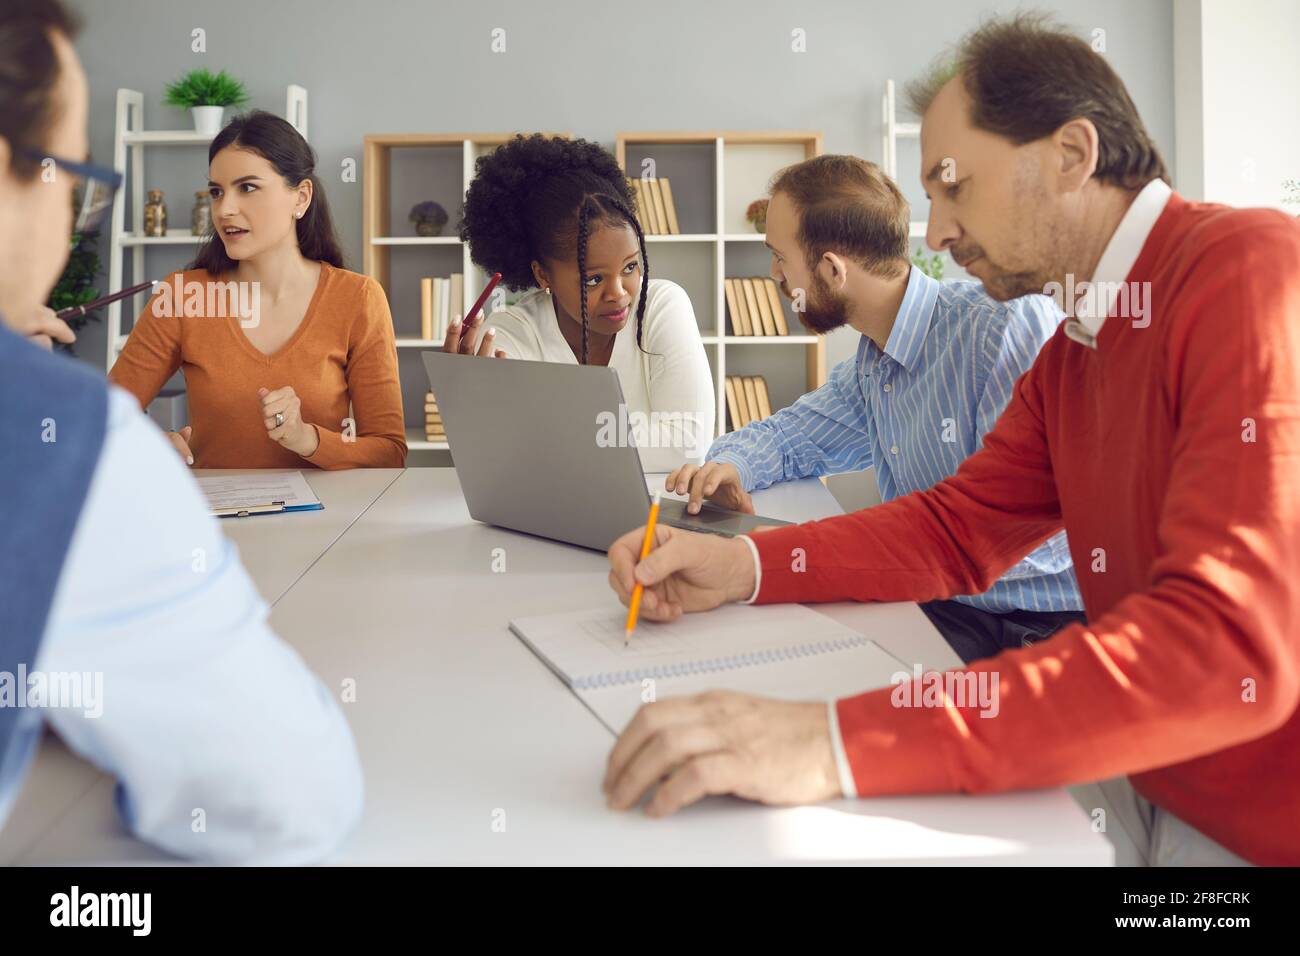 Group of diverse business people discussing their projects sitting at office table together Stock Photo